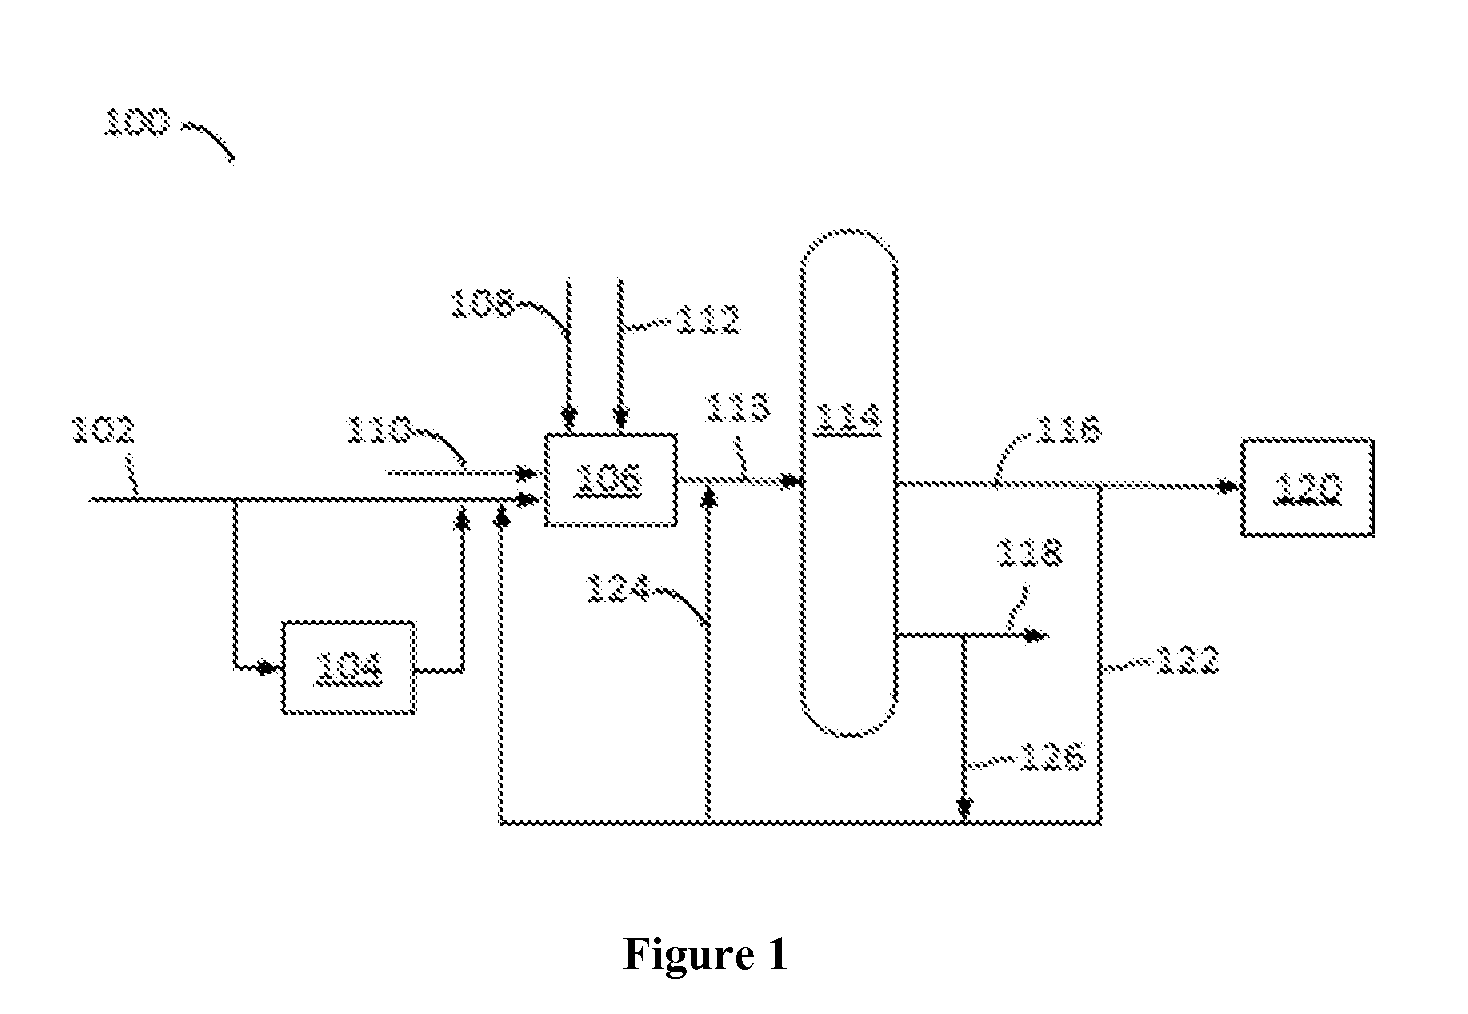 Method of Making Aromatic Hydrocarbons